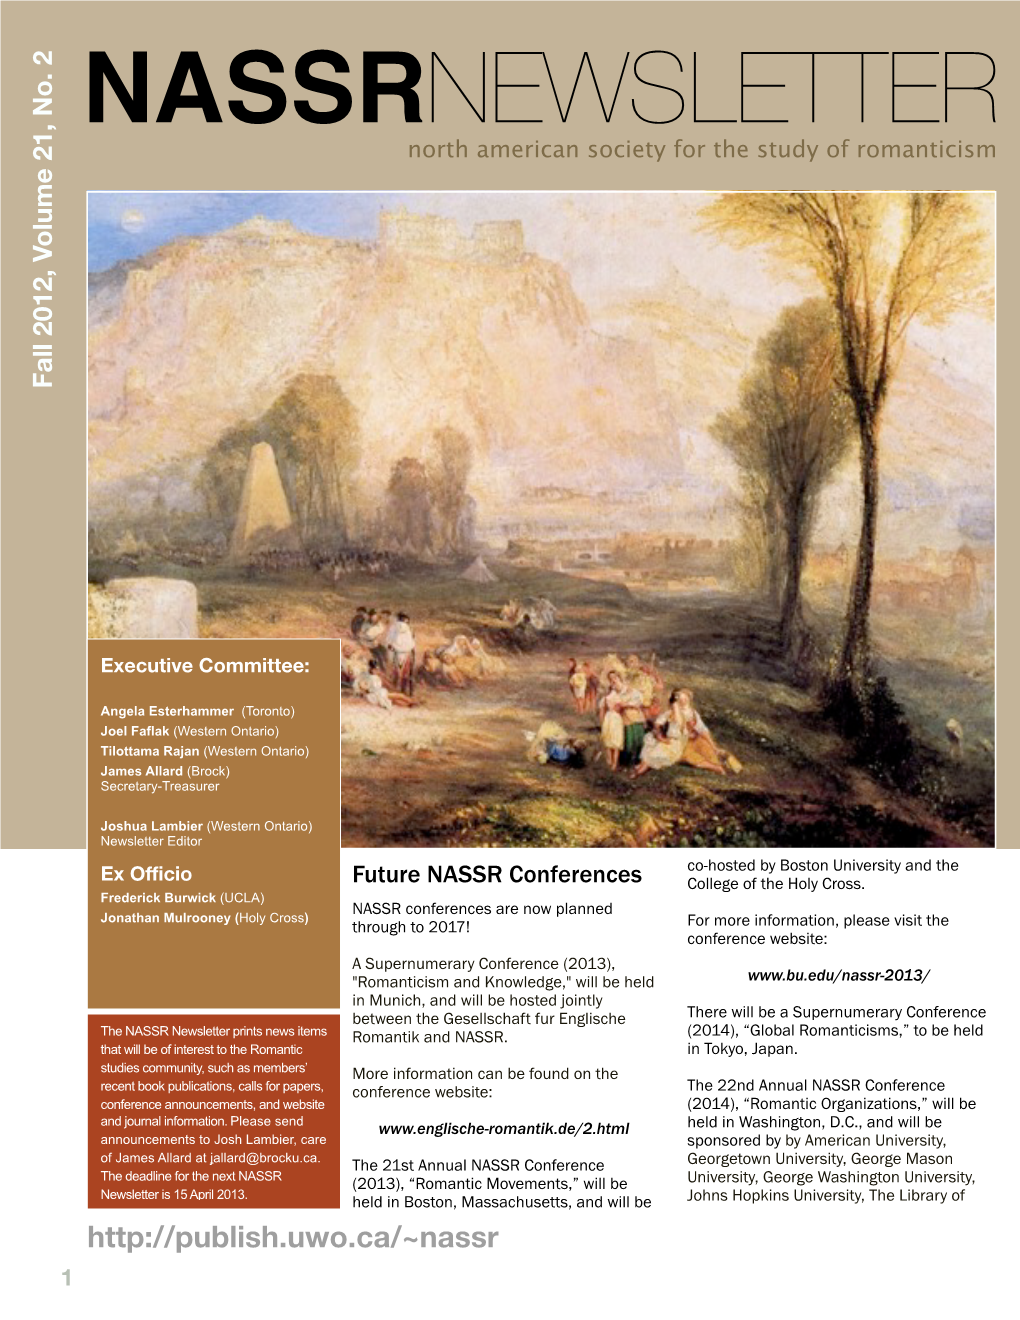 NASSRNEWSLETTER North American Society for the Study of Romanticism Fall 2012, Volume 21, No